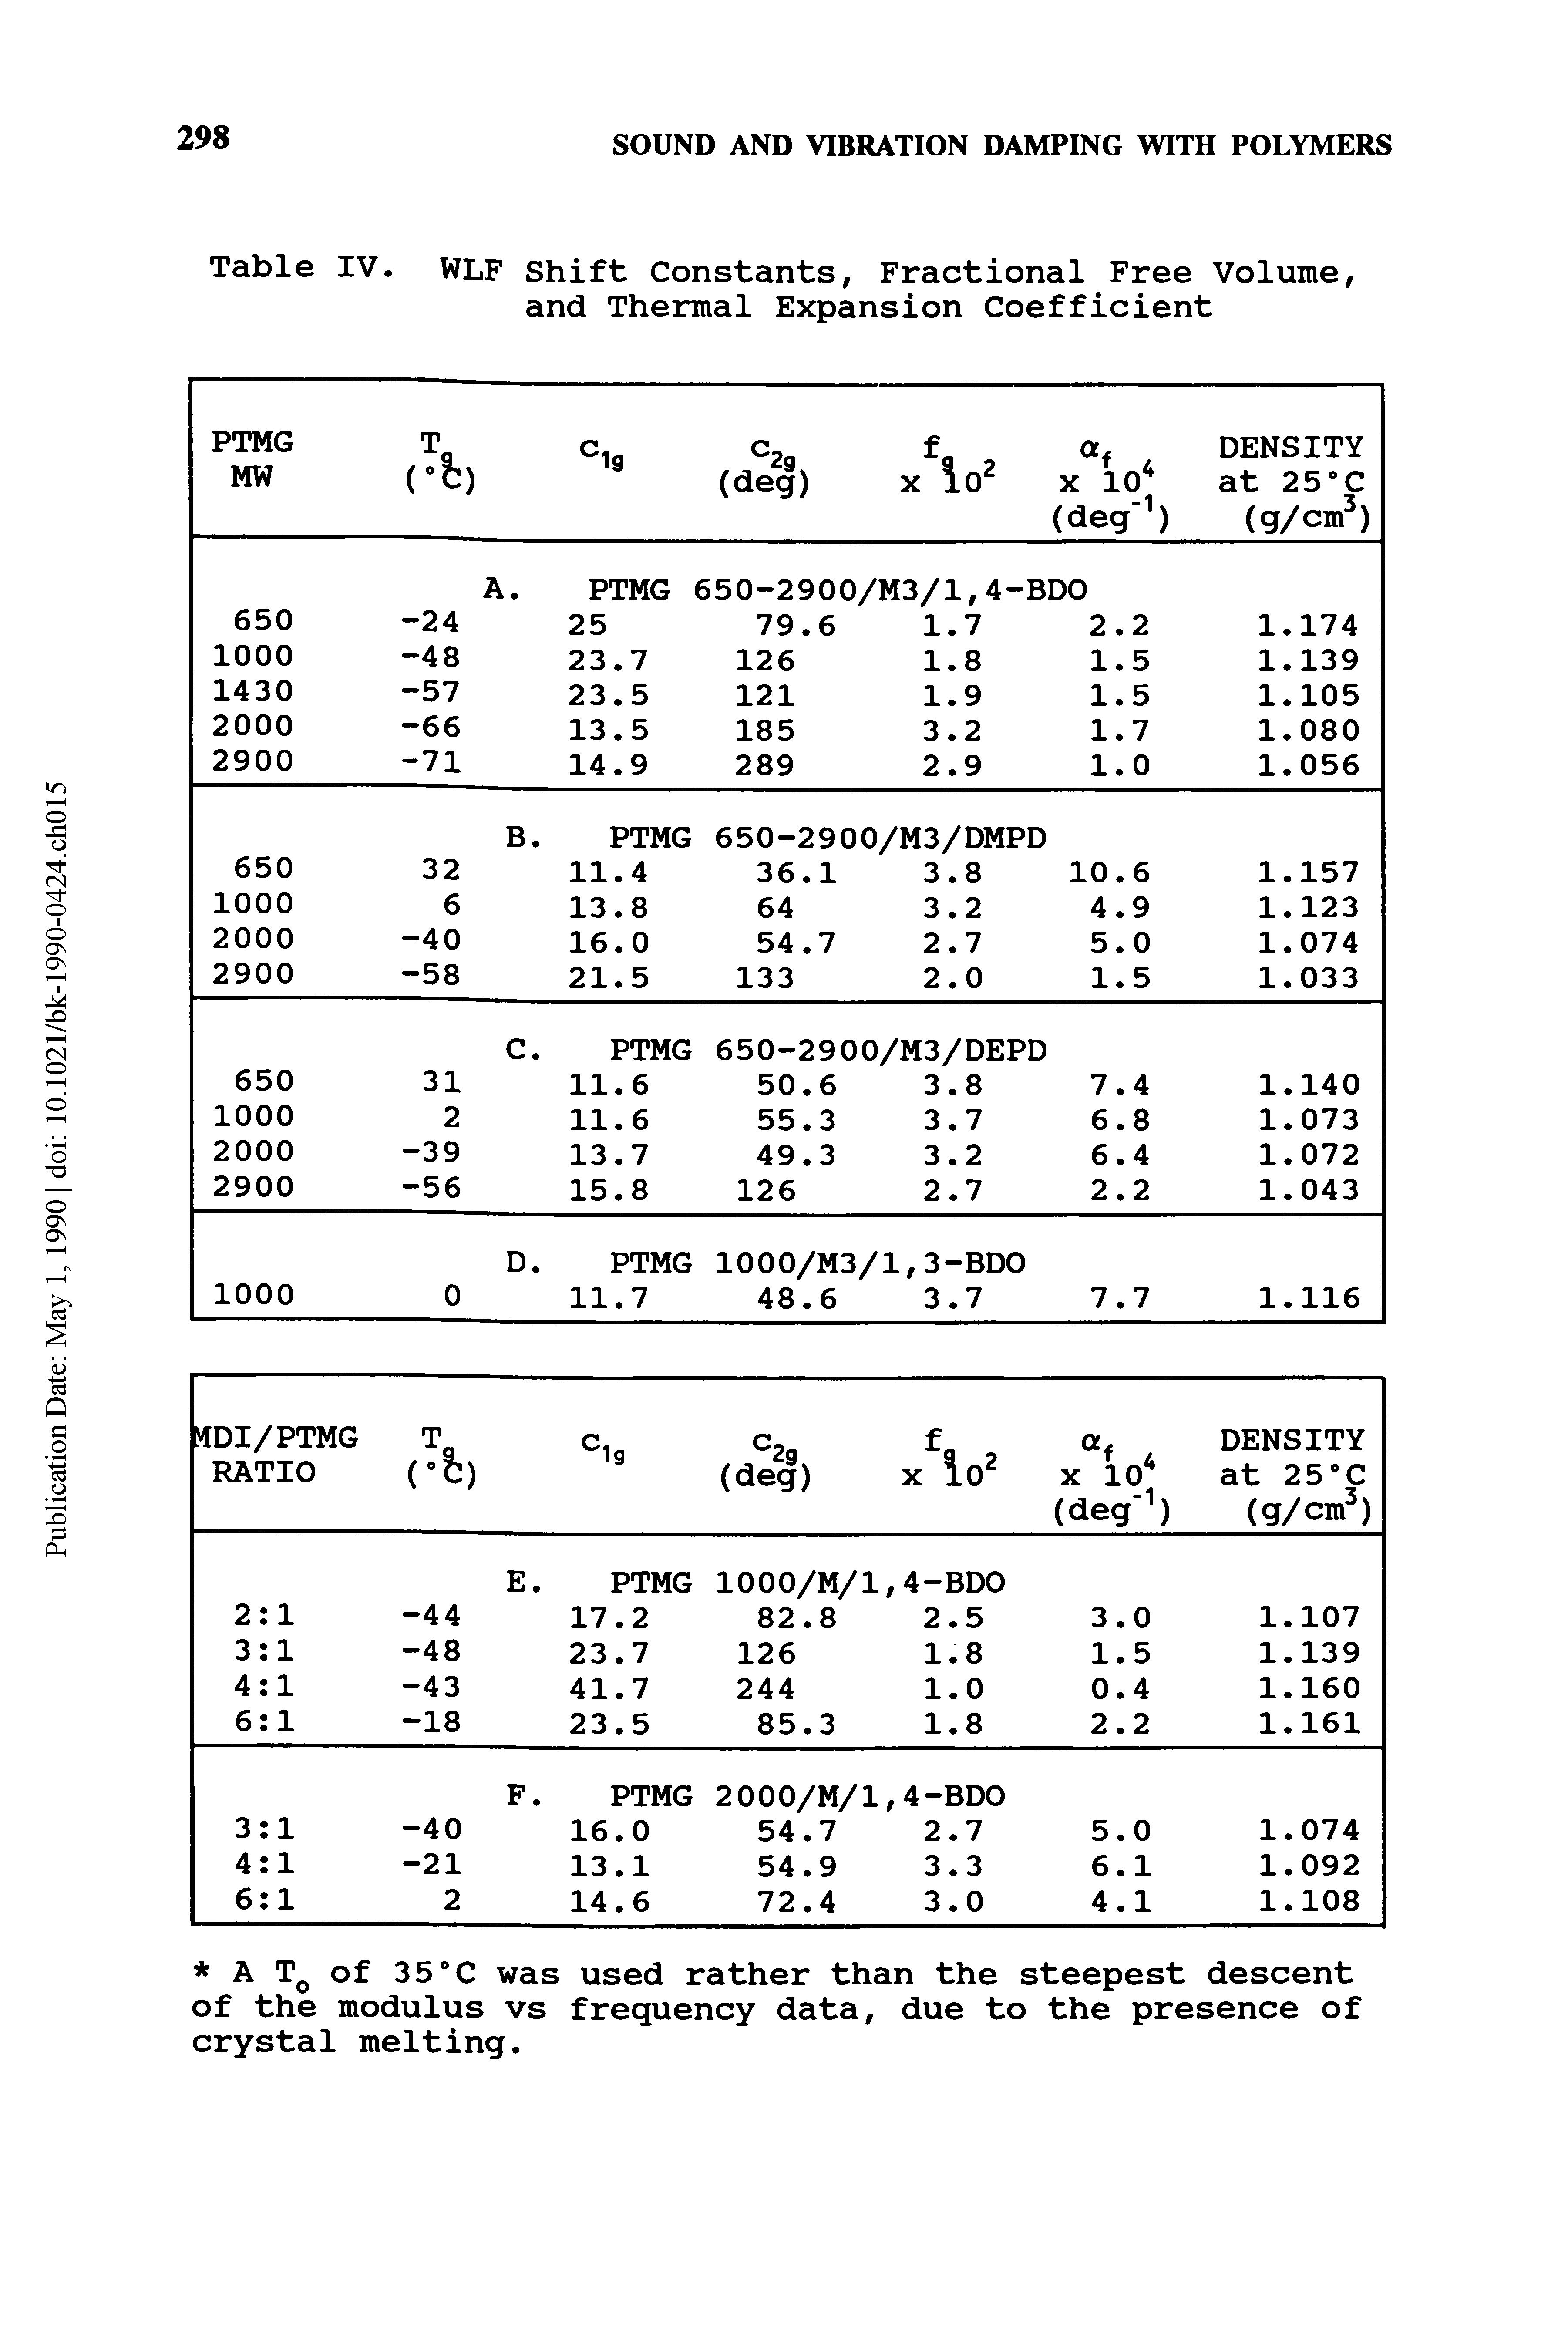 Table IV. WLF Shift Constants, Fractional Free Volume, and Thermal Expansion Coefficient...